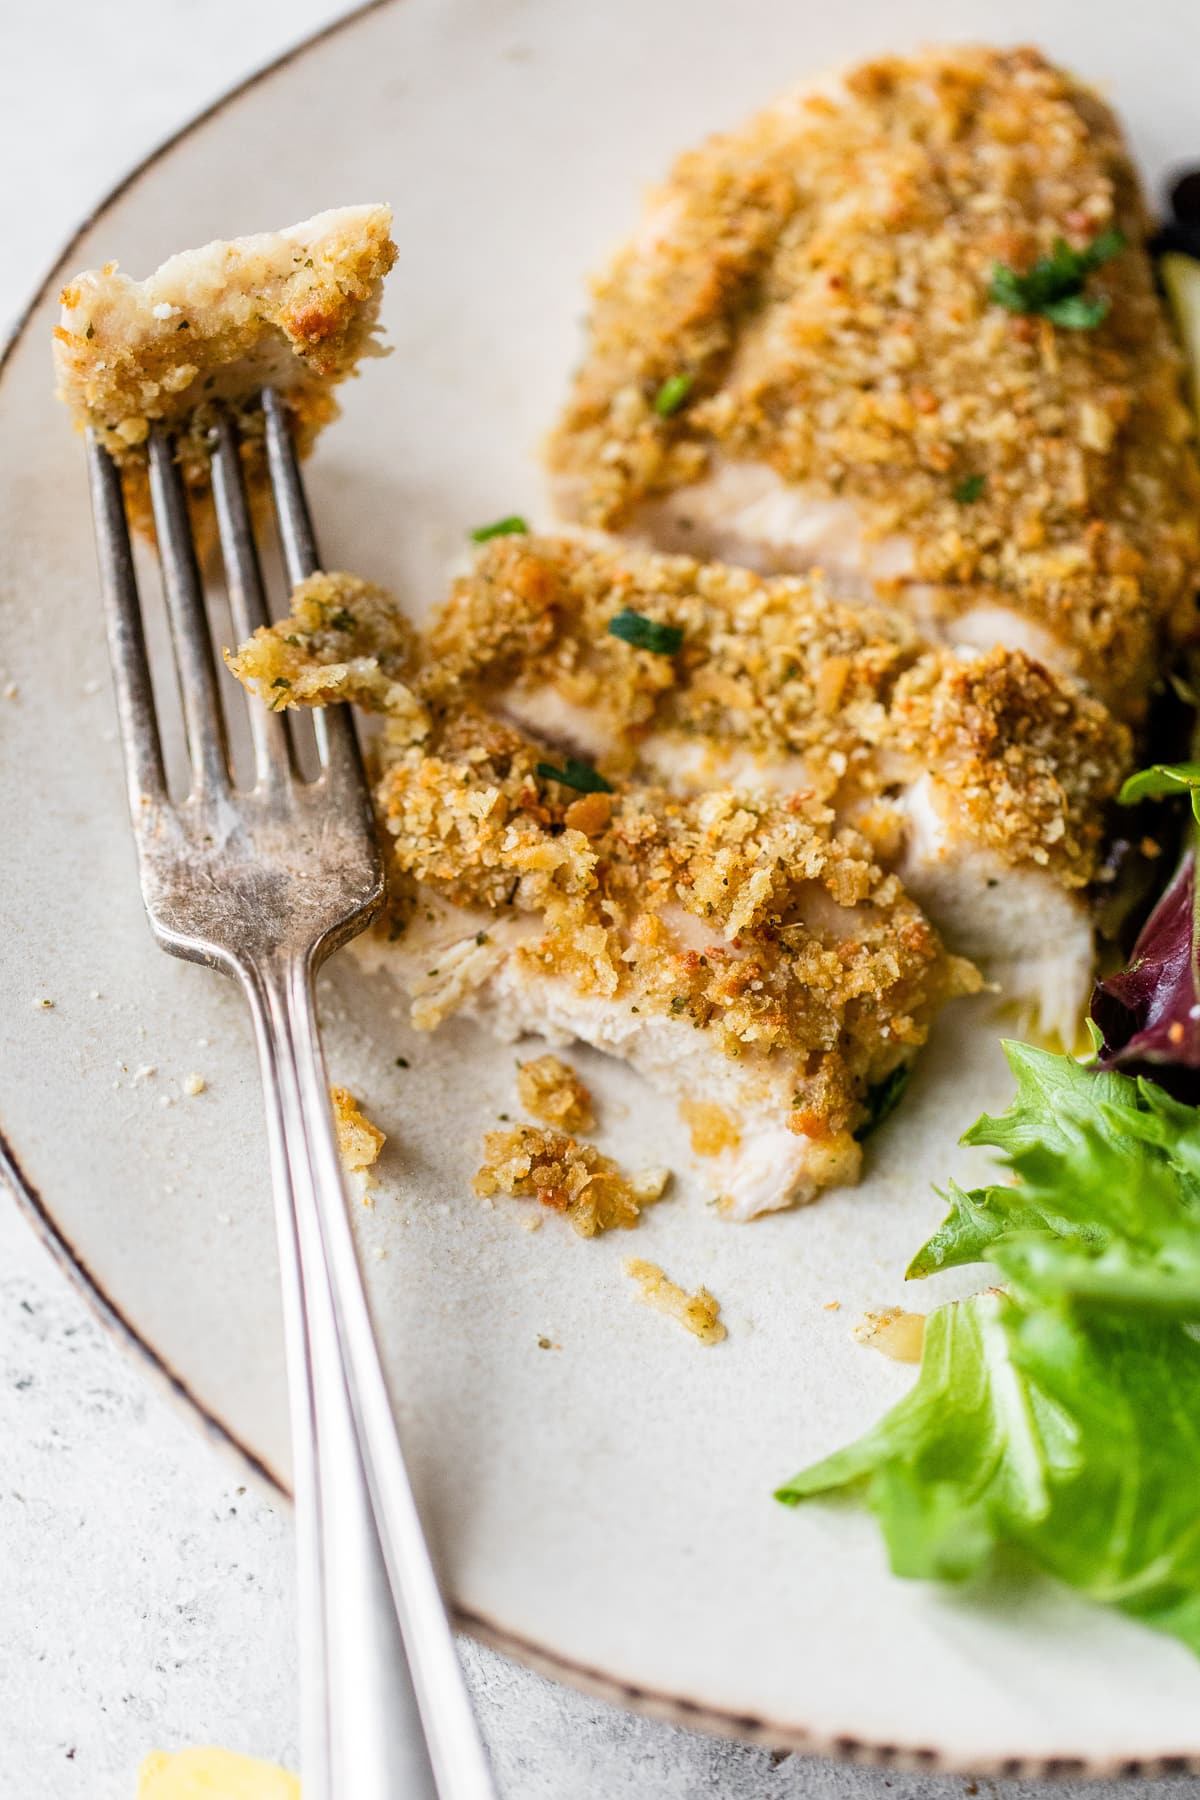 cut up baked chicken breast with lettuce and a fork